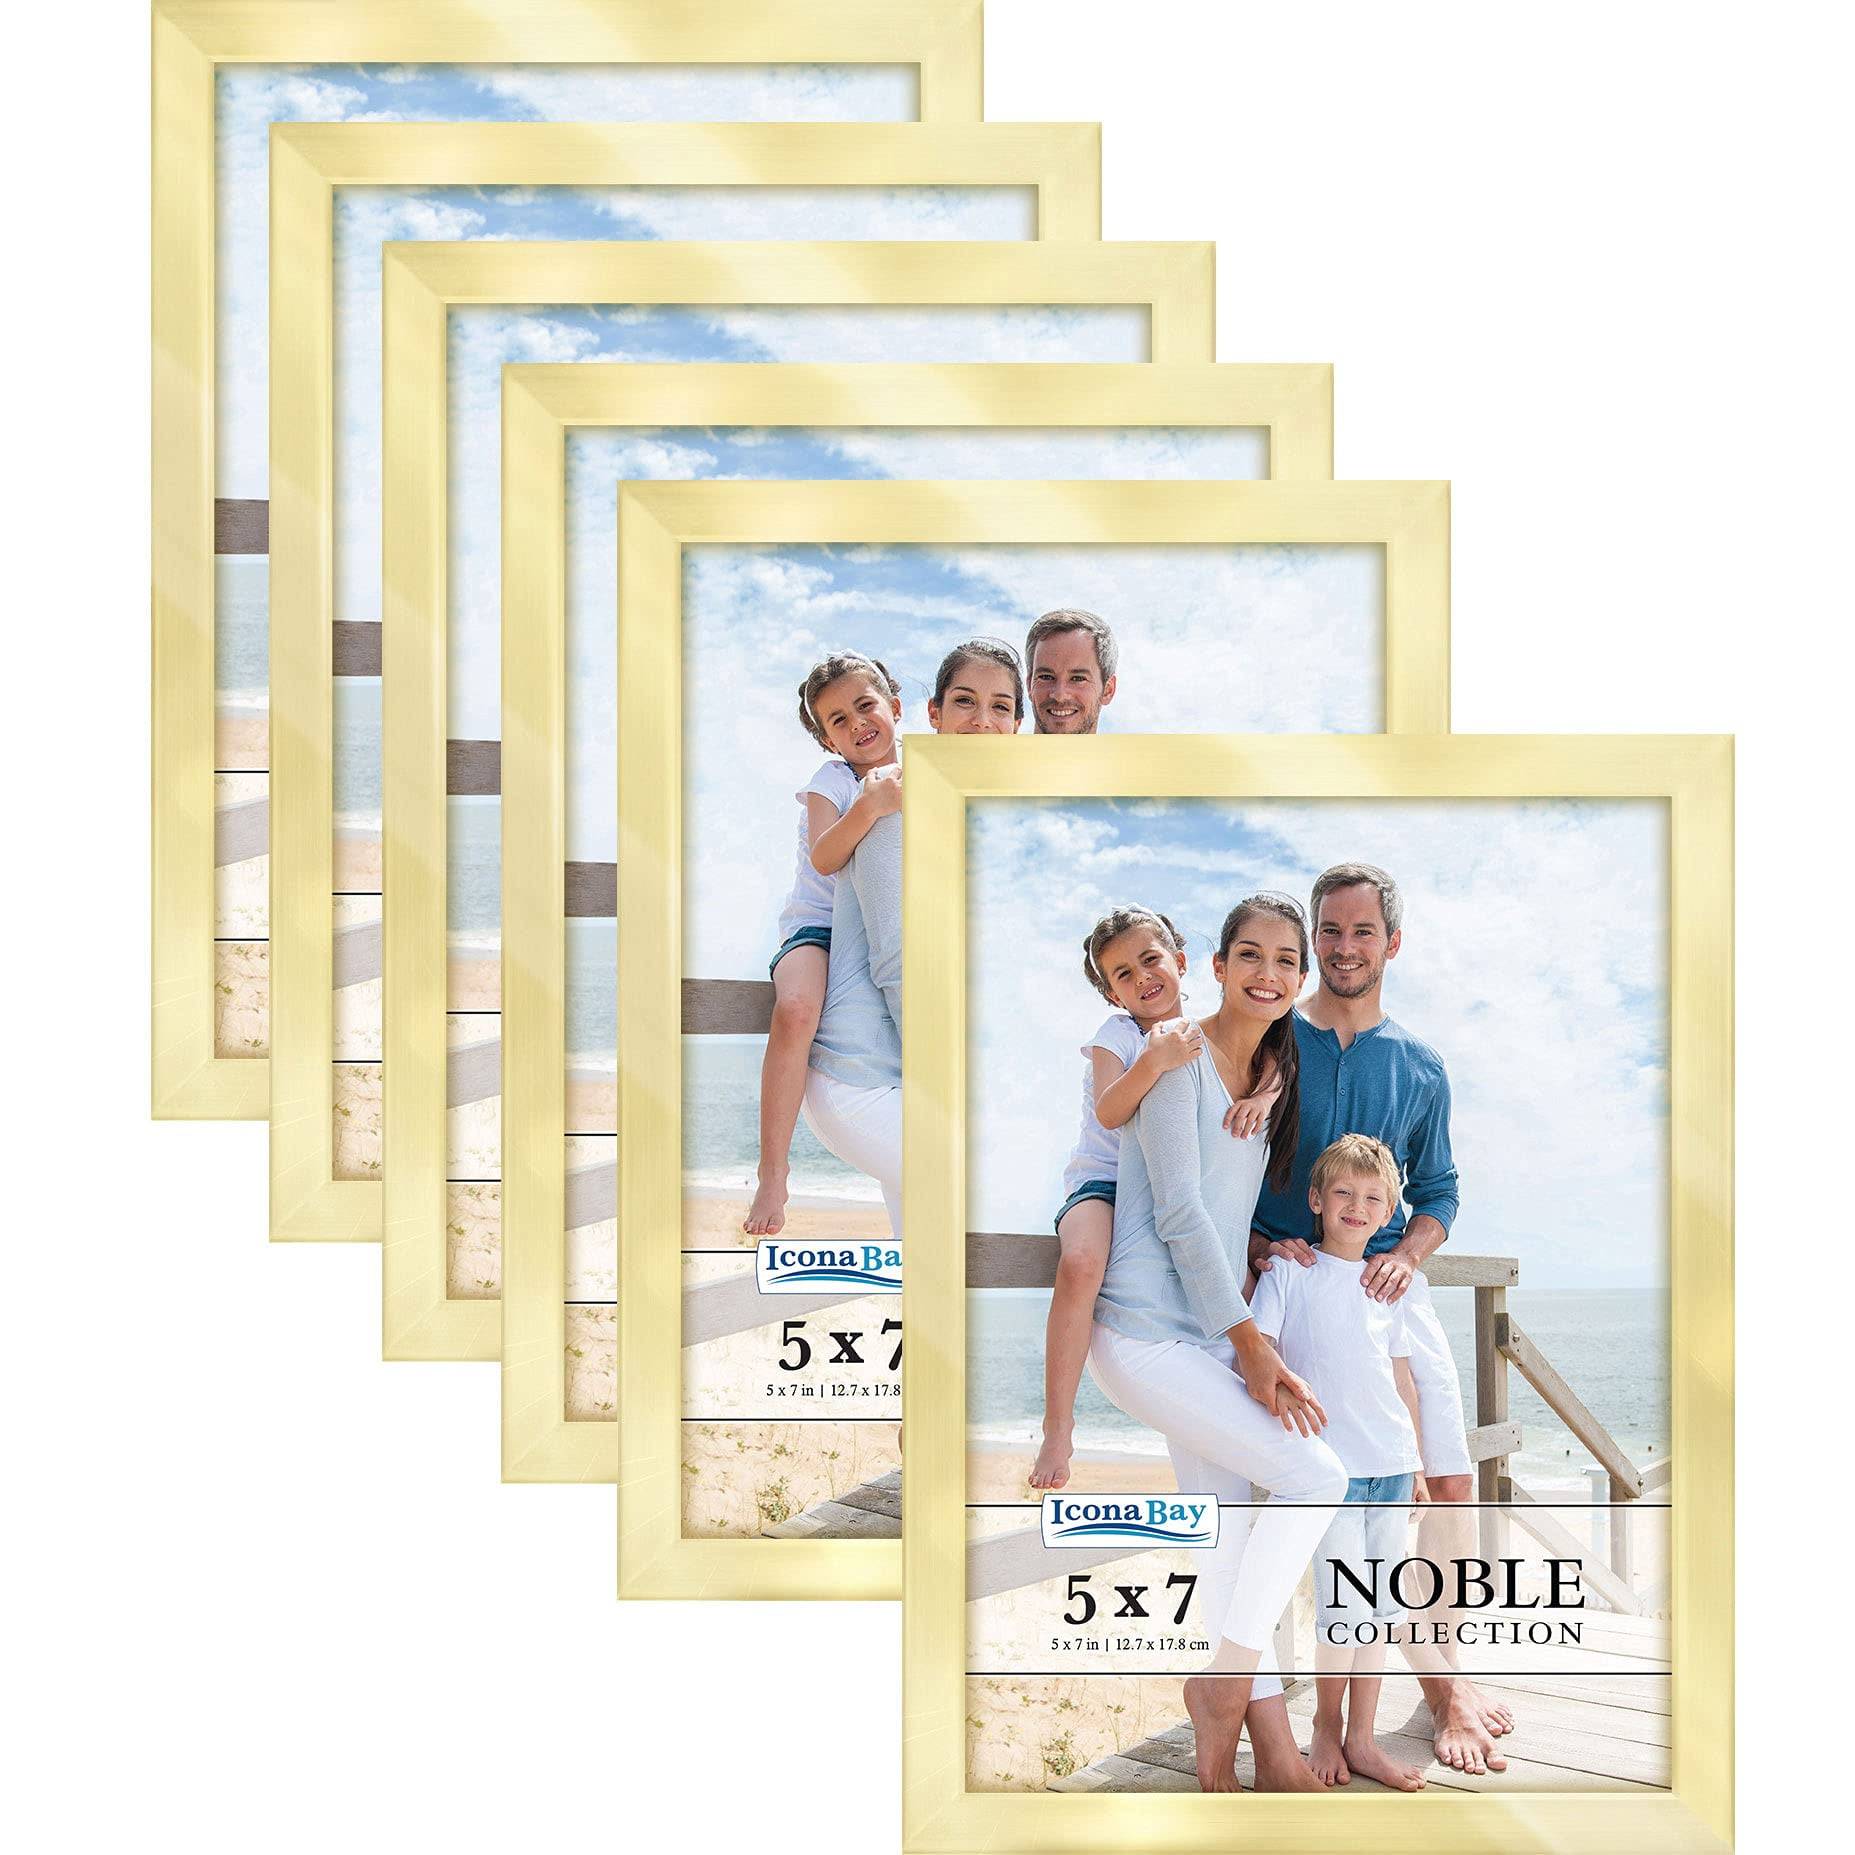 Icona Bay 4x6 White Picture Frames, 3 PK, Eve Tabletop Picture Frames